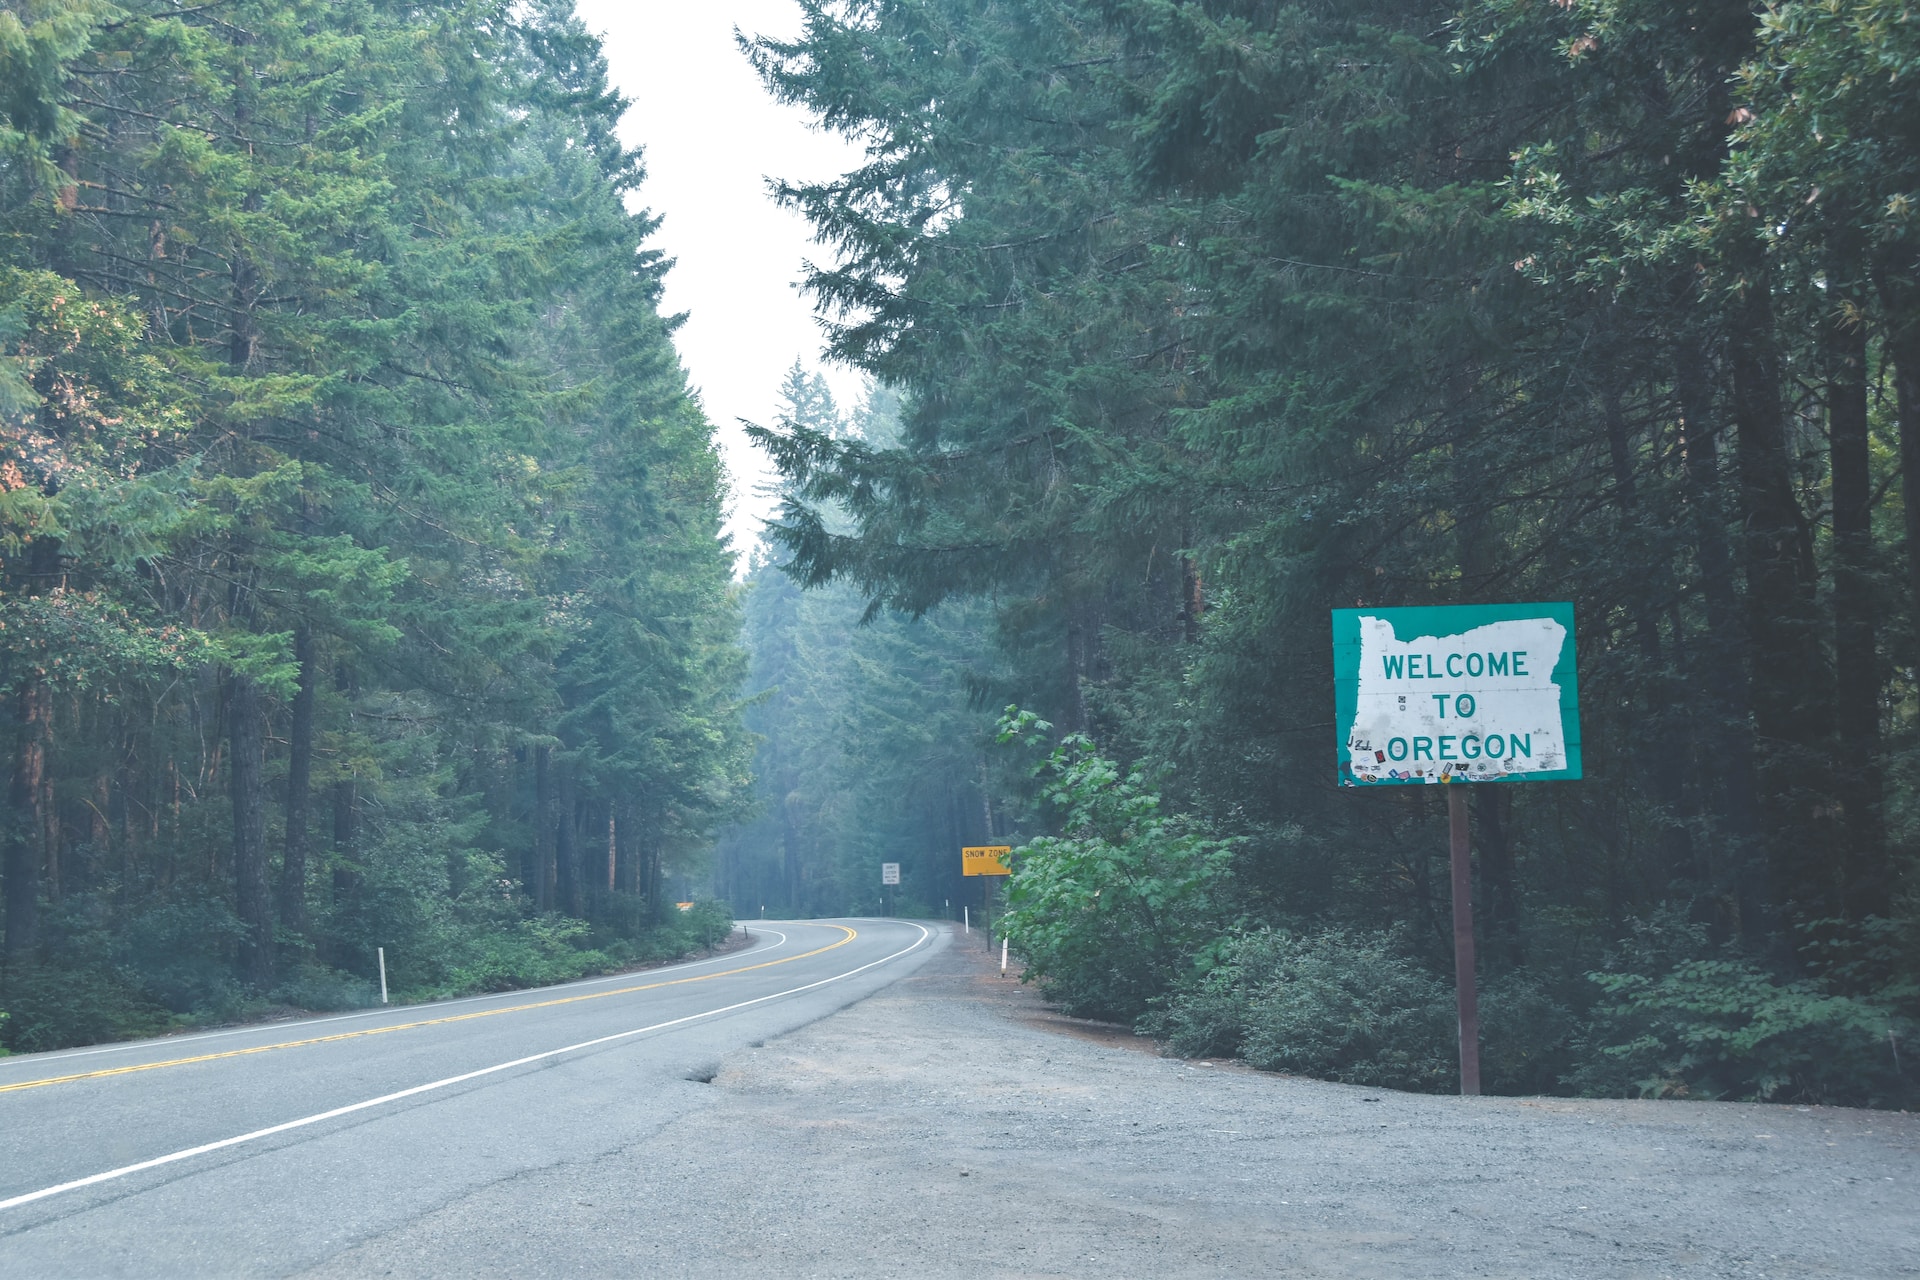 Welcome to Oregon sign in a forest